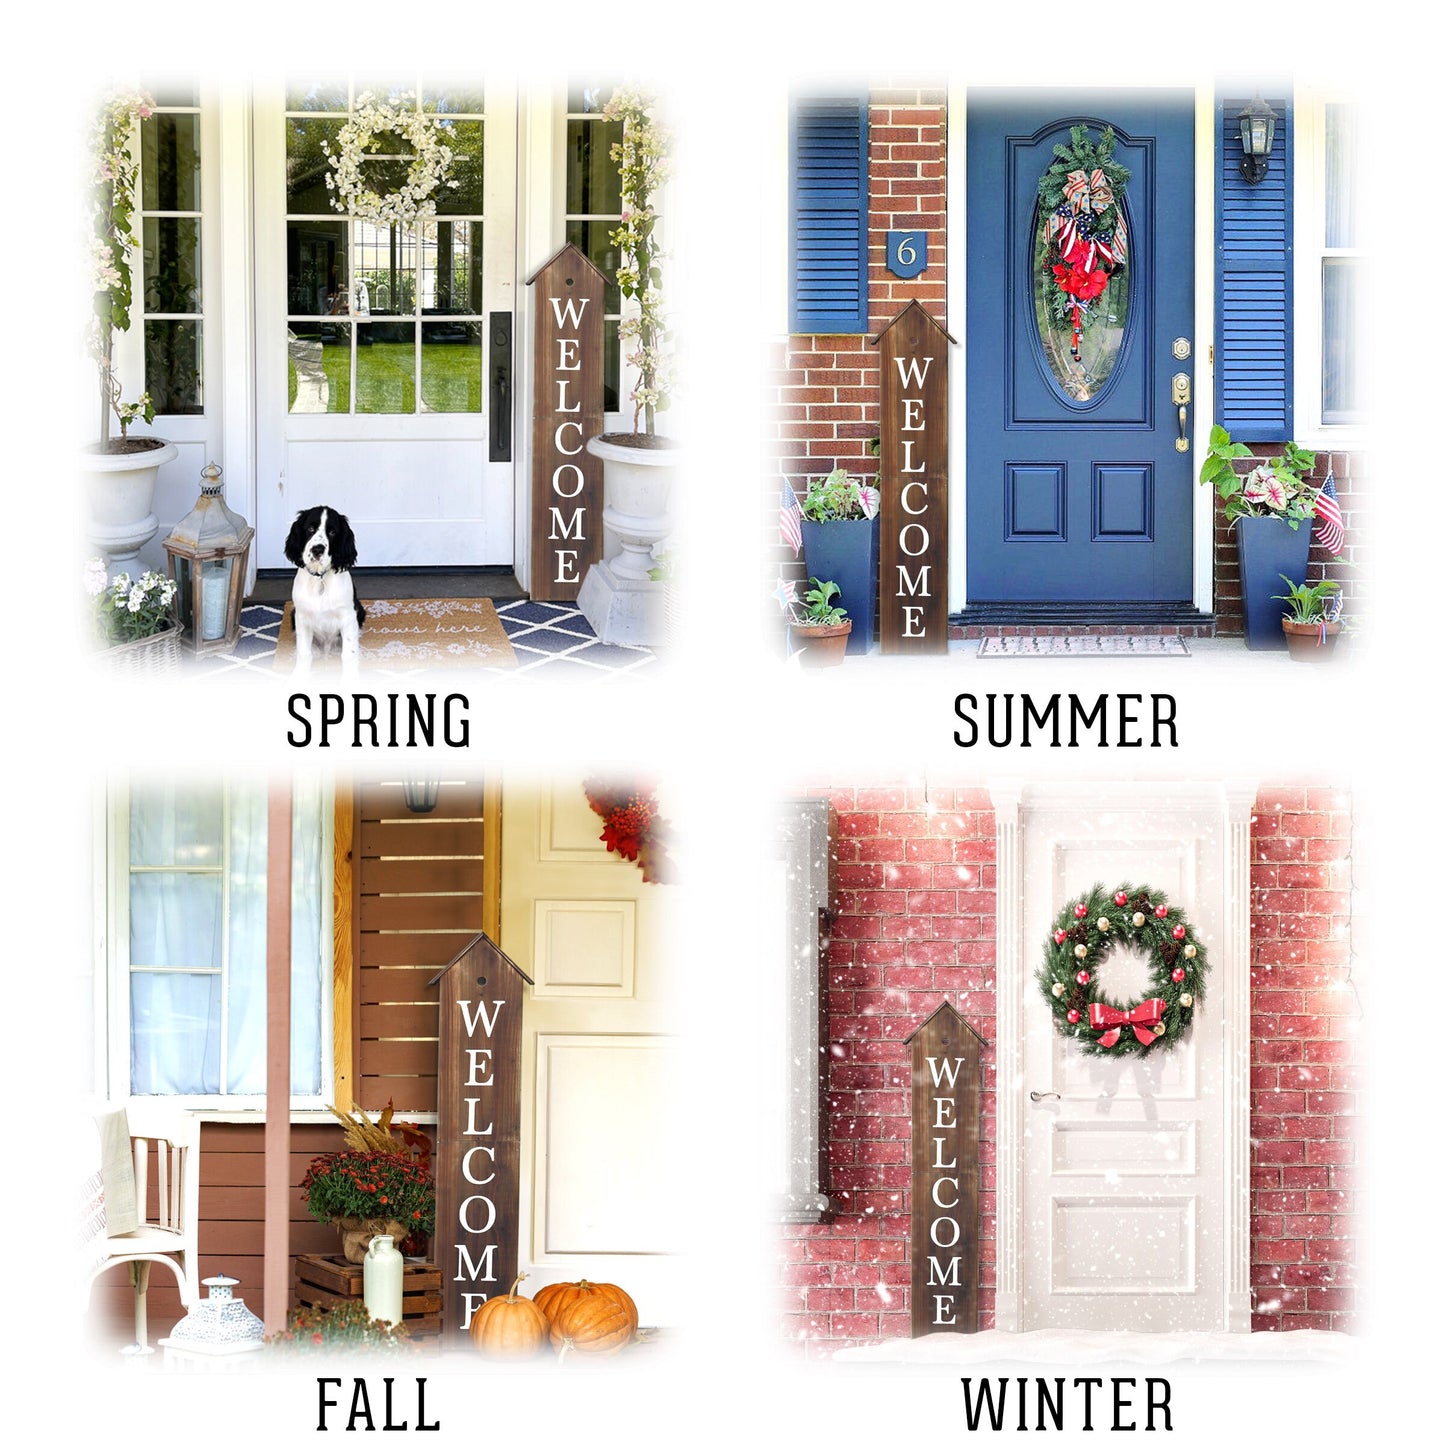 Welcome guests with a charming touch - 48in wooden porch sign with house shape